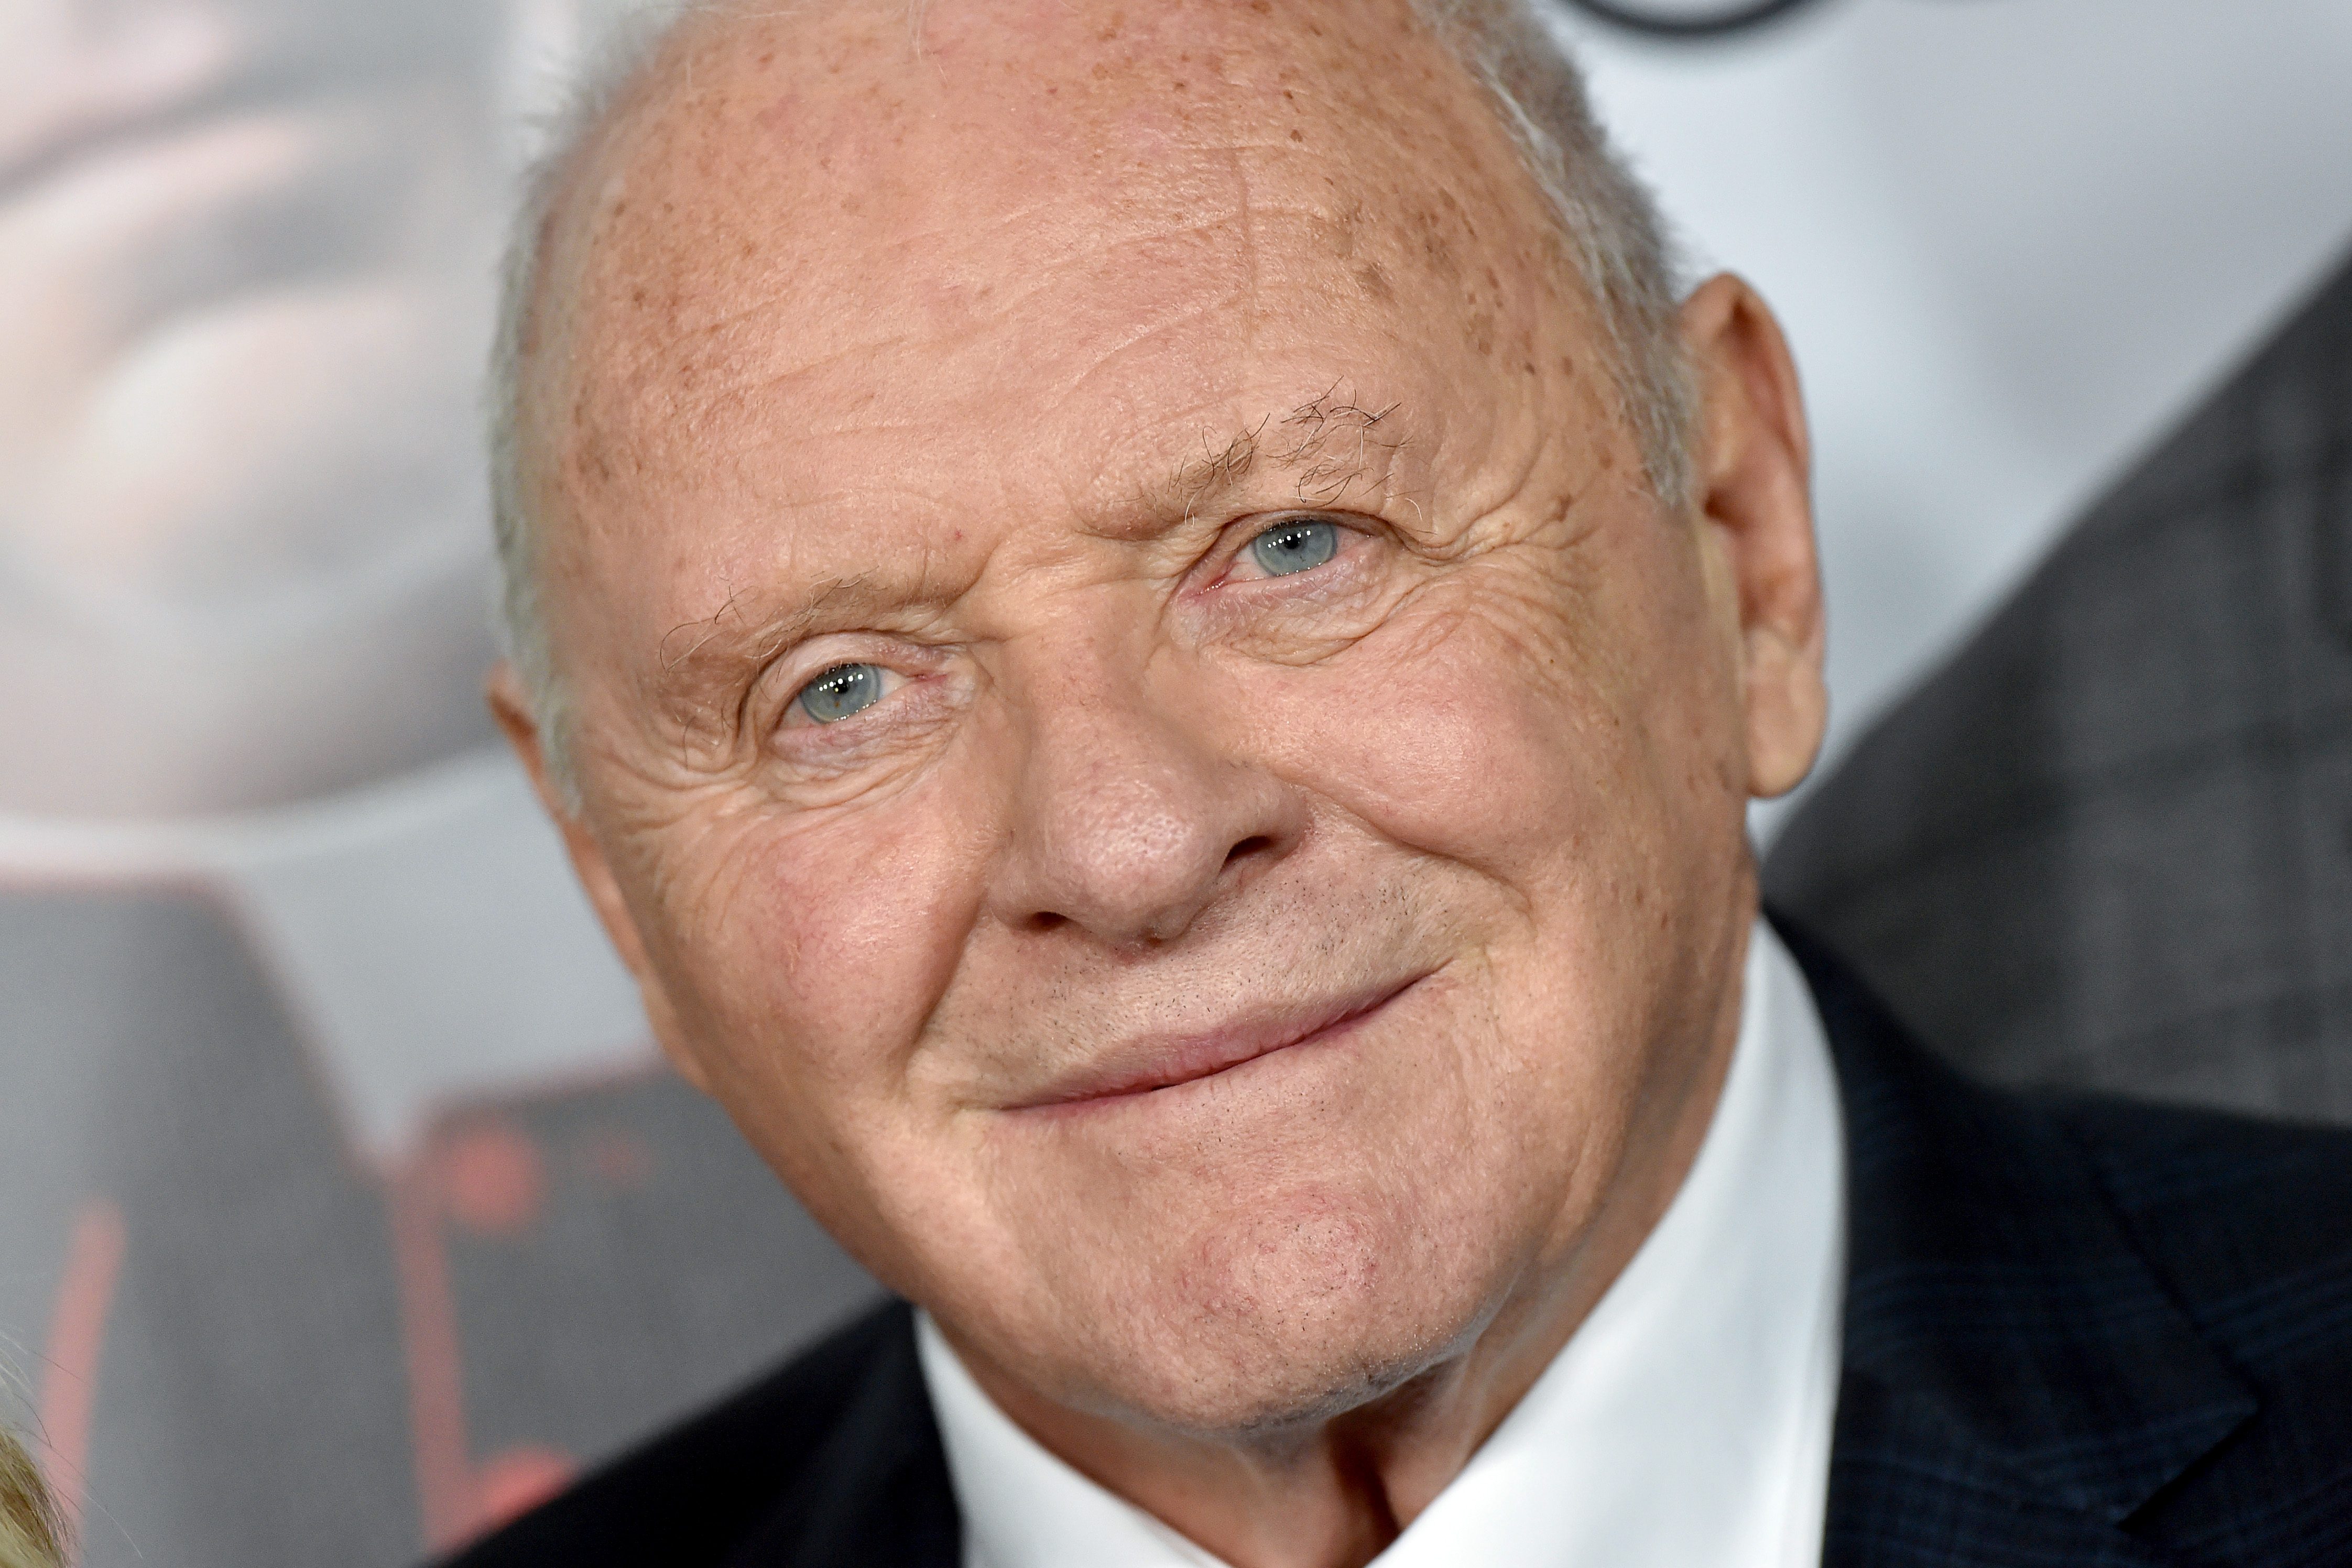 Anthony Hopkins attends the "The Two Popes" premiere during AFI FEST 2019 presented by Audi at TCL Chinese Theatre on November 18, 2019 in Hollywood, California.